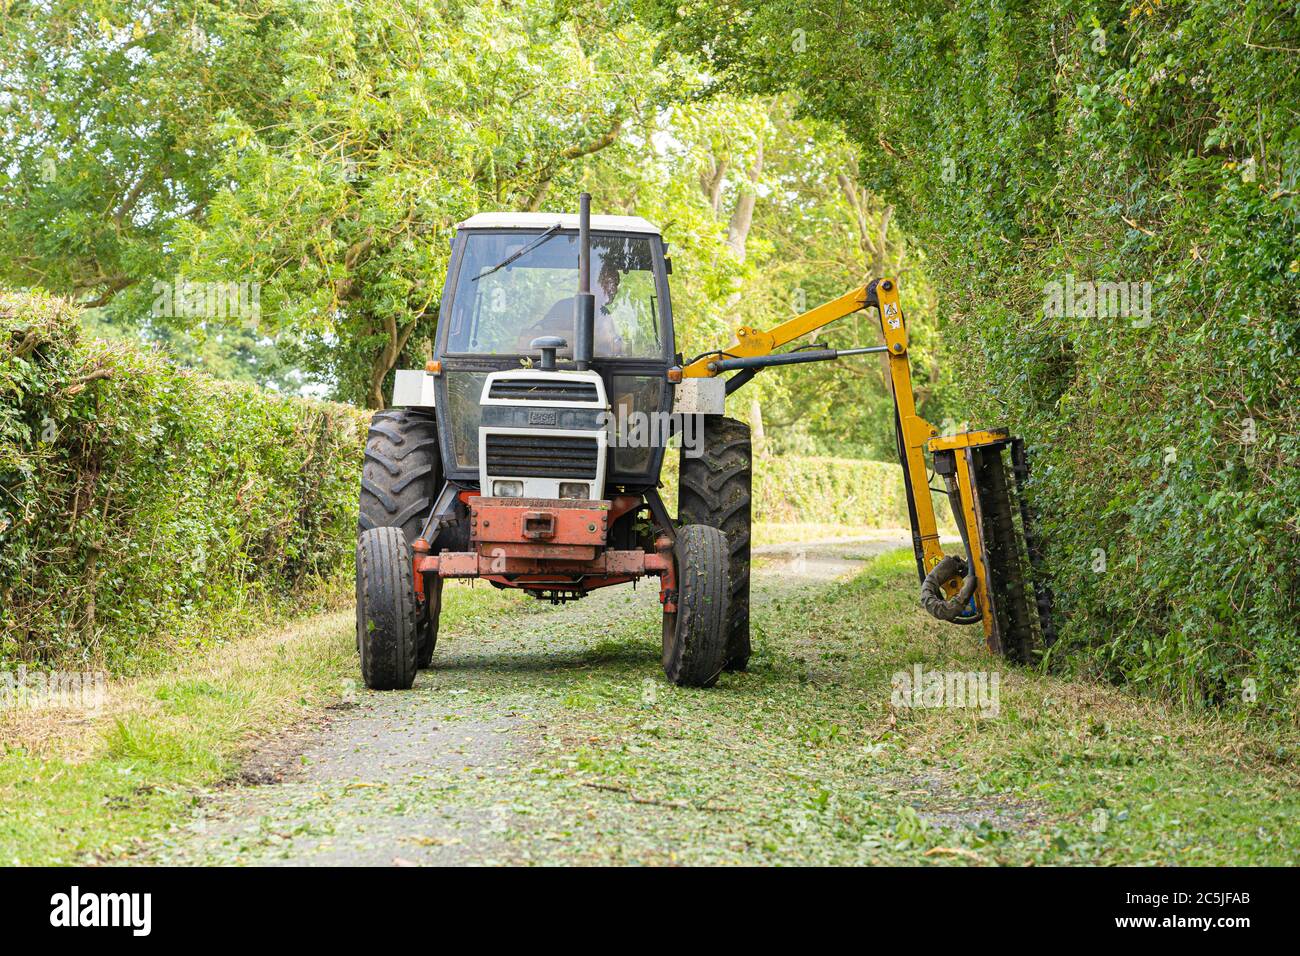 Front view of man in a tractor using a flail hedge cutter to cut hedges in a country lane. Much Hadham. Rear view version available in my portfolio. Stock Photo